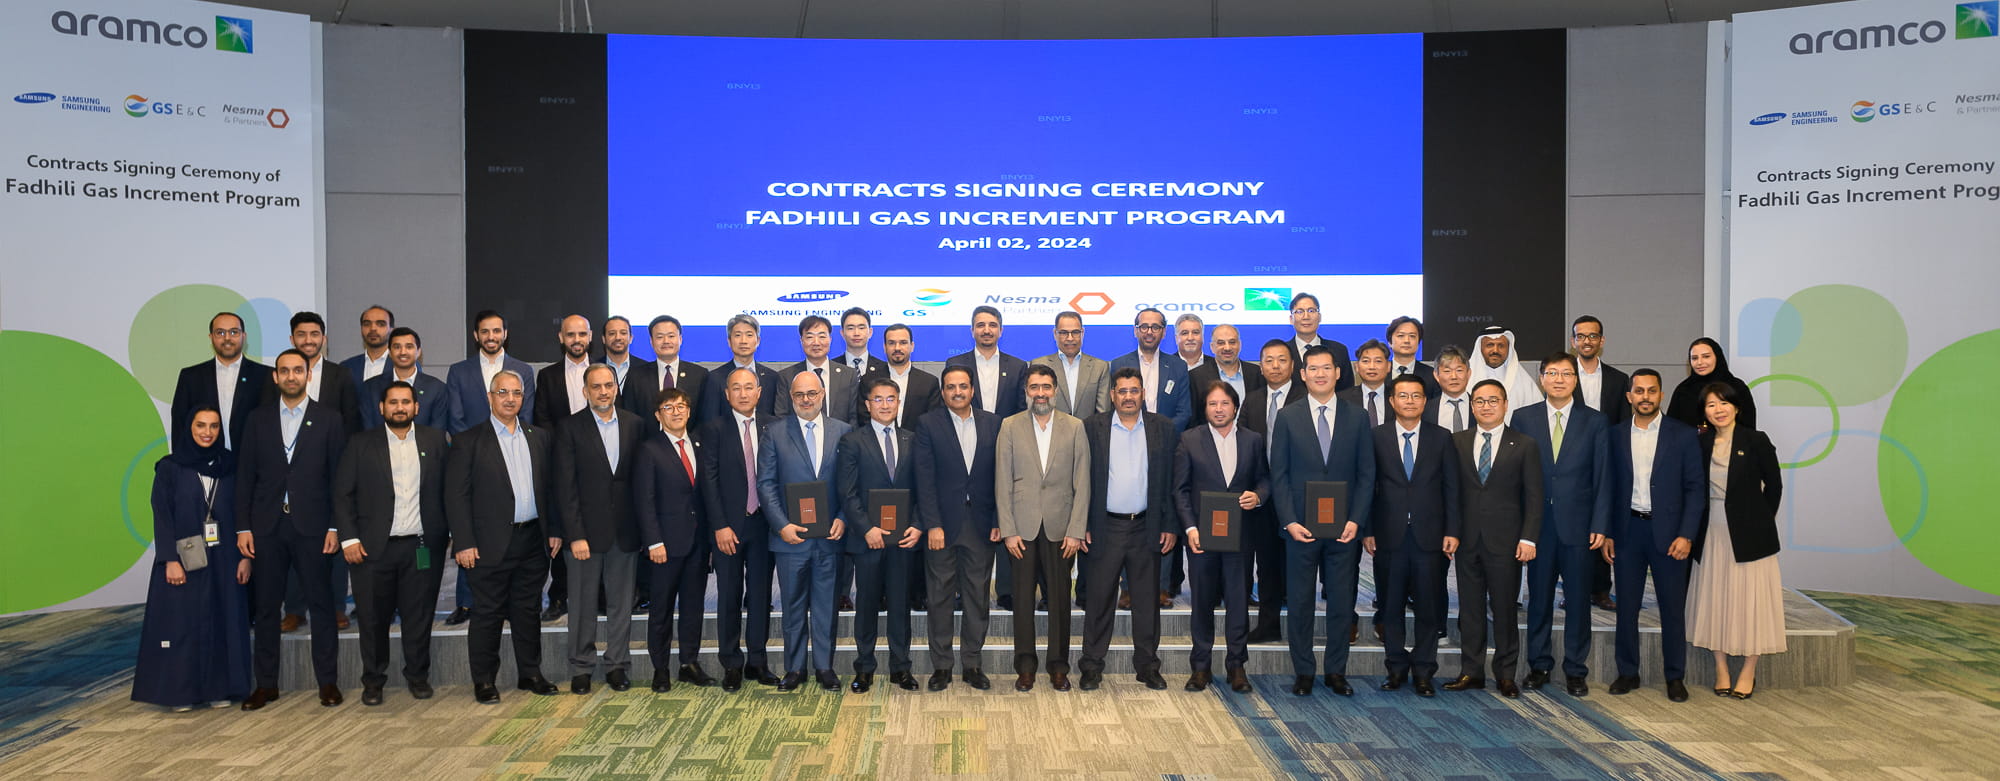 Signing ceremony for engineering, procurement and construction contracts for the Fadhili Gas Plant expansion in Dhahran, Saudi Arabia, on April 2.